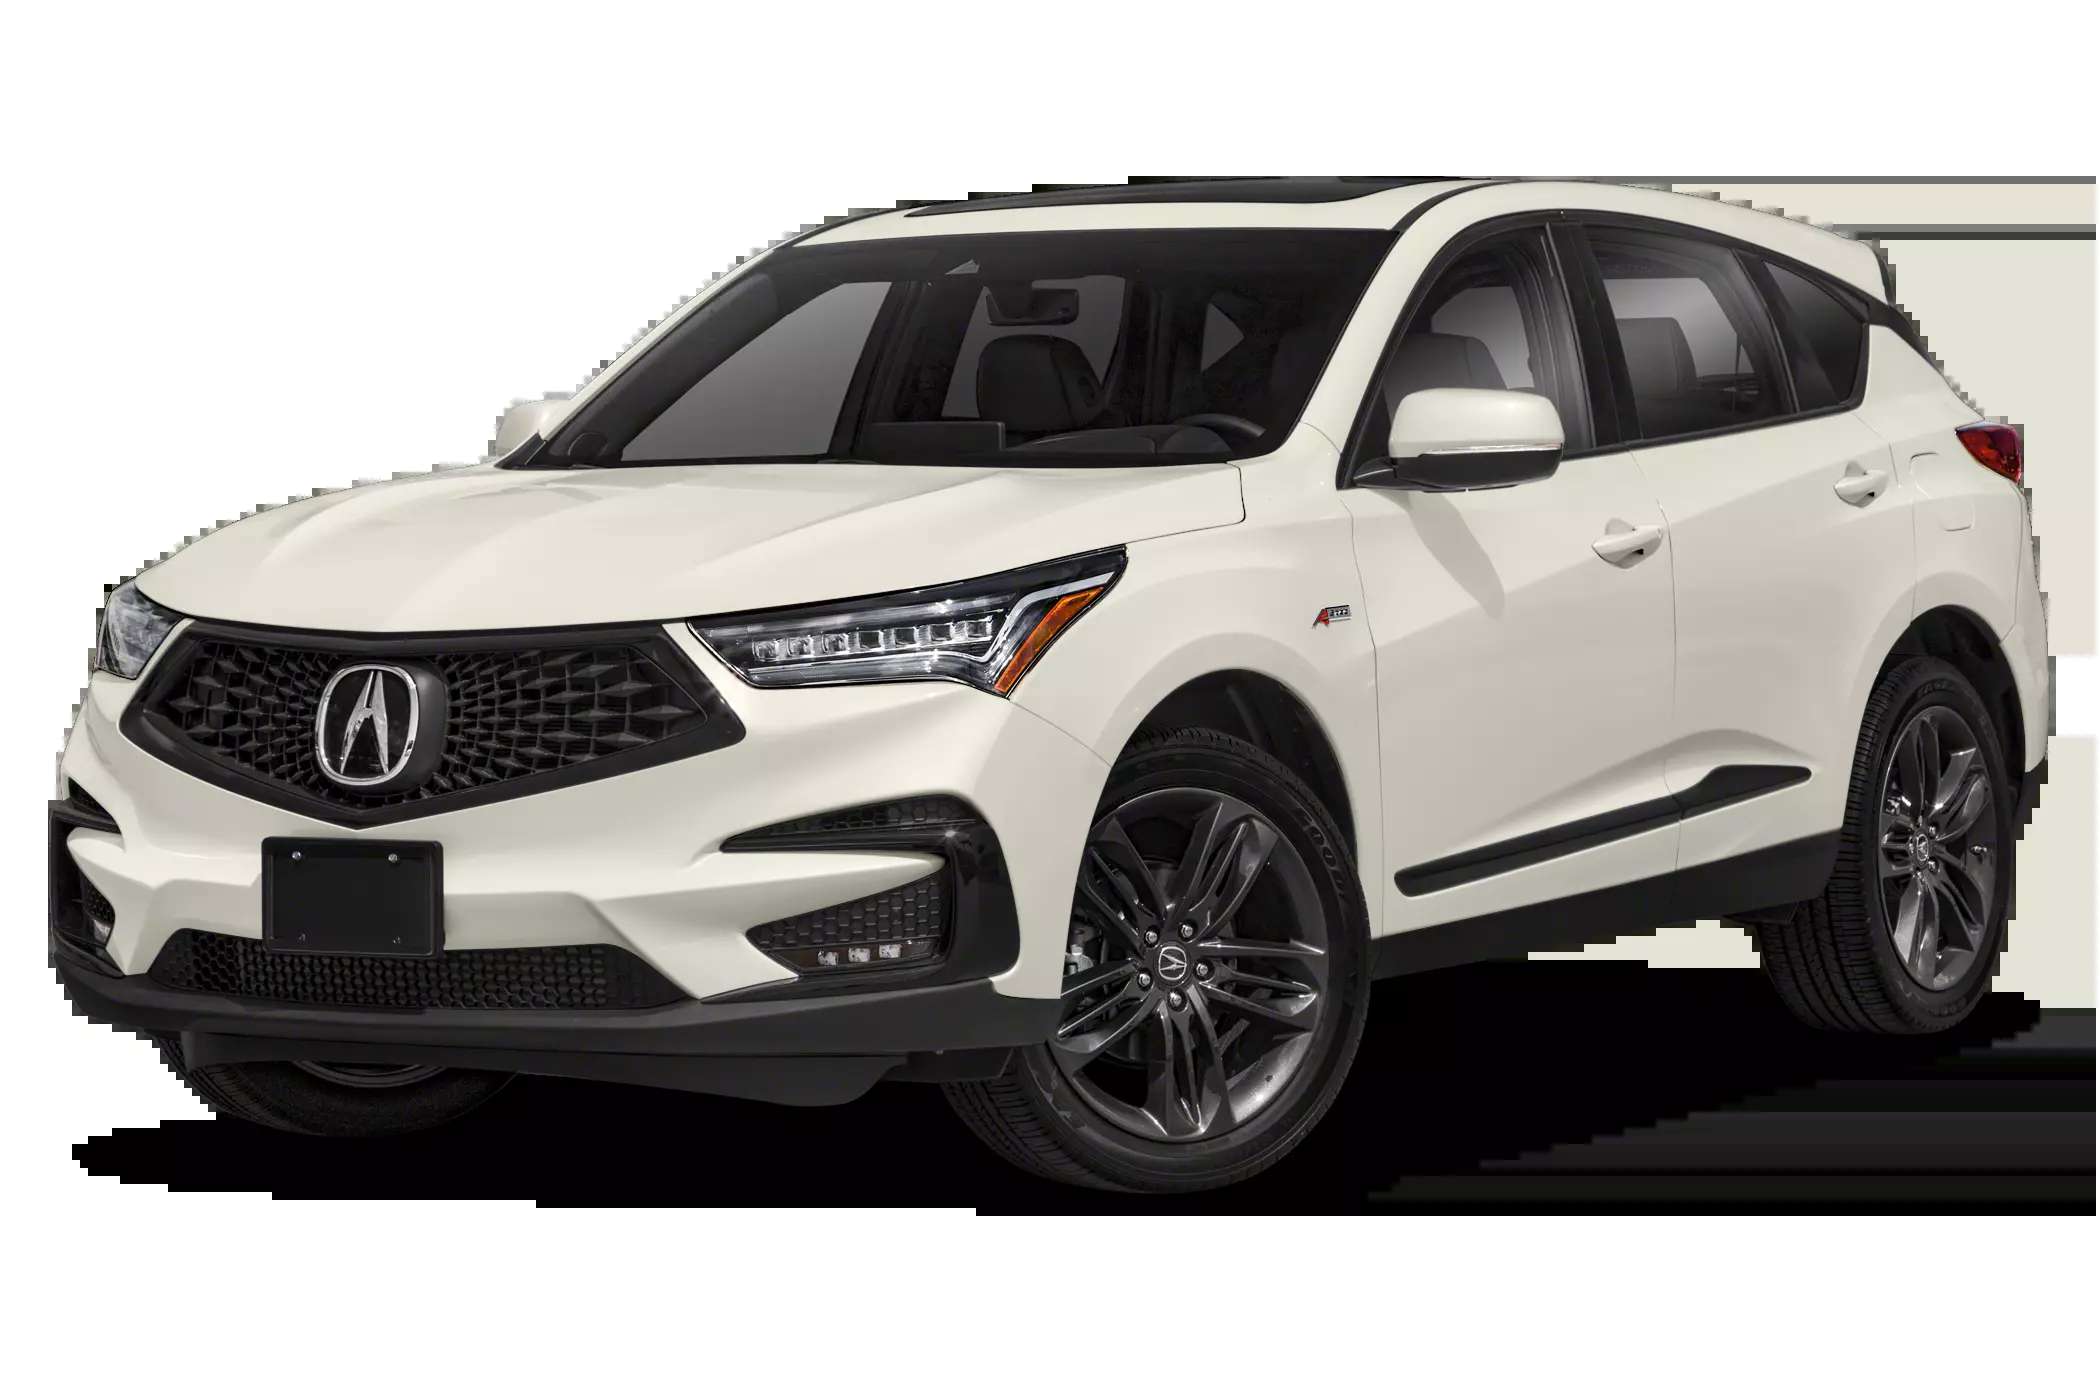 2021 Acura RDX PMC Edition 060 Times, Top Speed, Specs, Quarter Mile